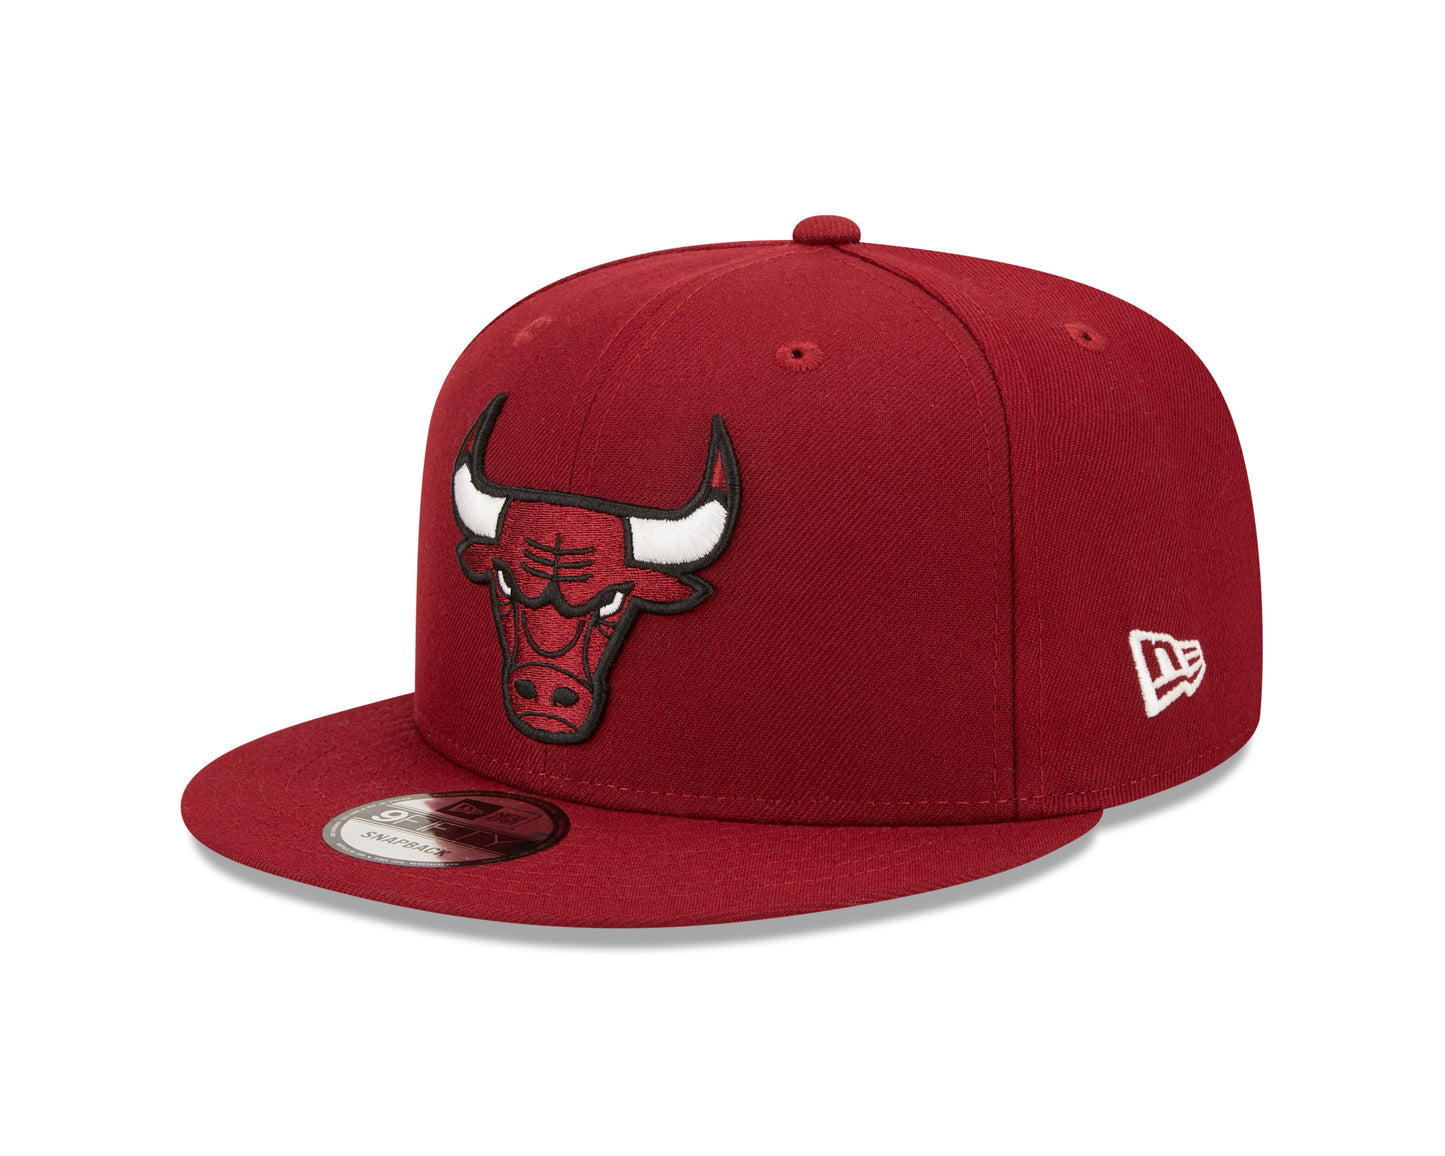 Chicago Bulls New Era Alternate City Edition 9FIFTY Snap Back Hat- Red